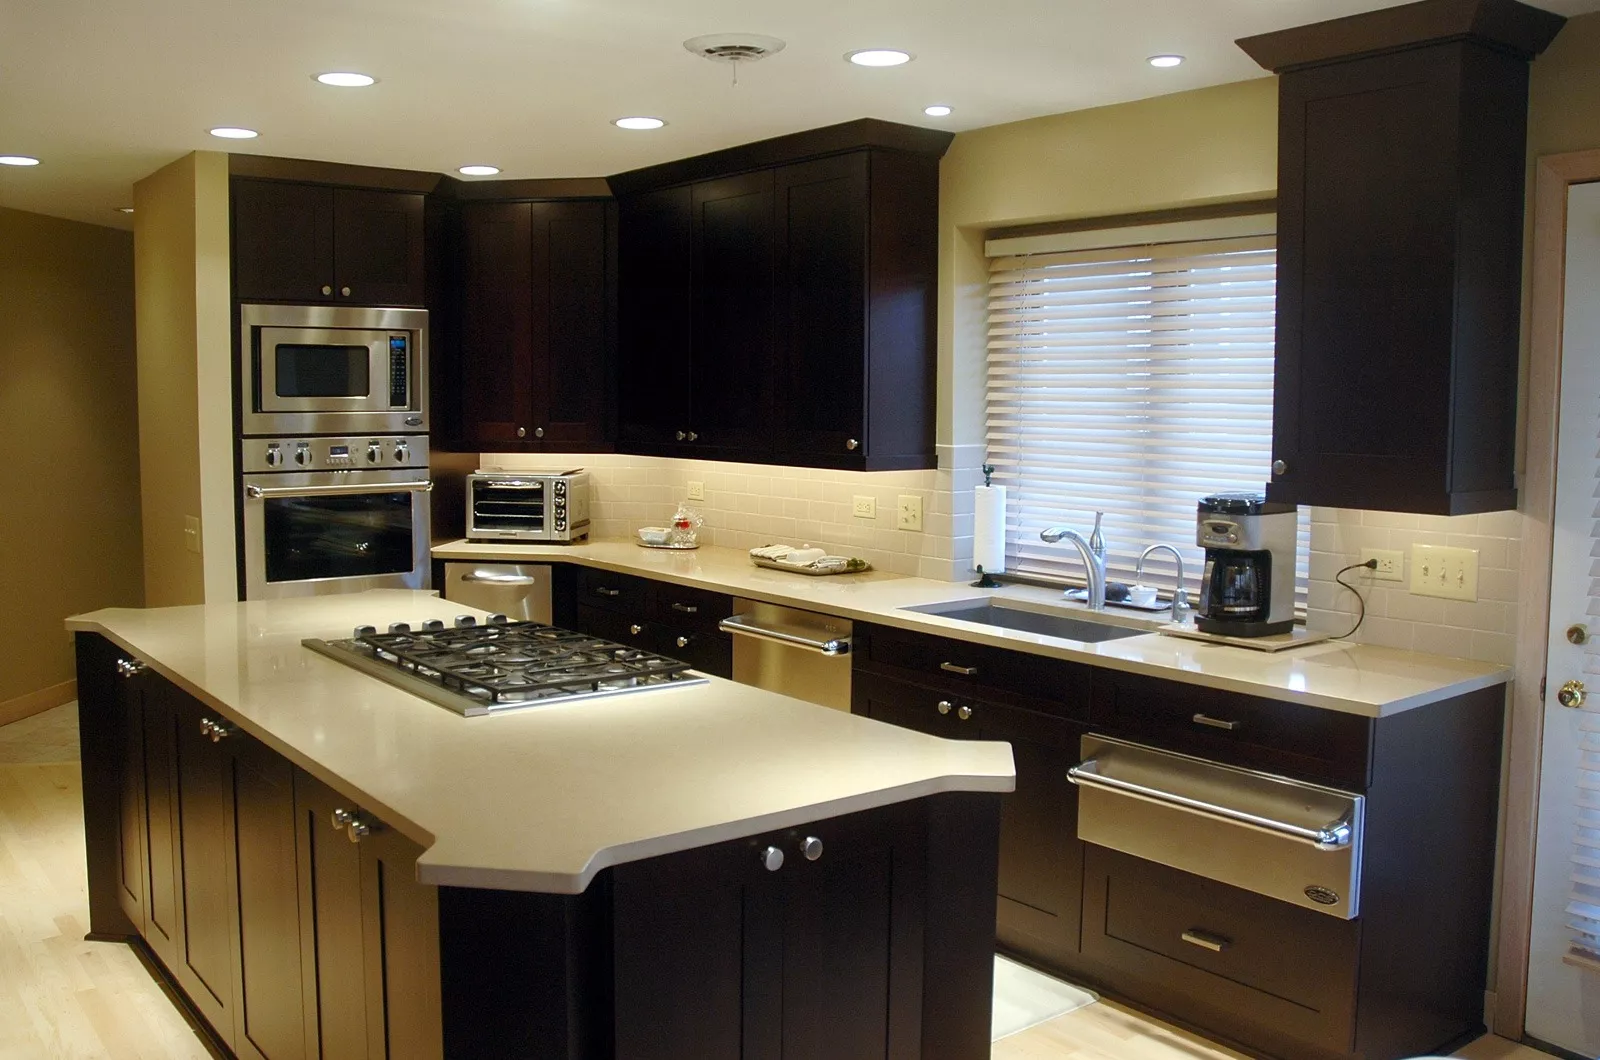 This remodeled kitchen has modern dark cabinets and marble countertops